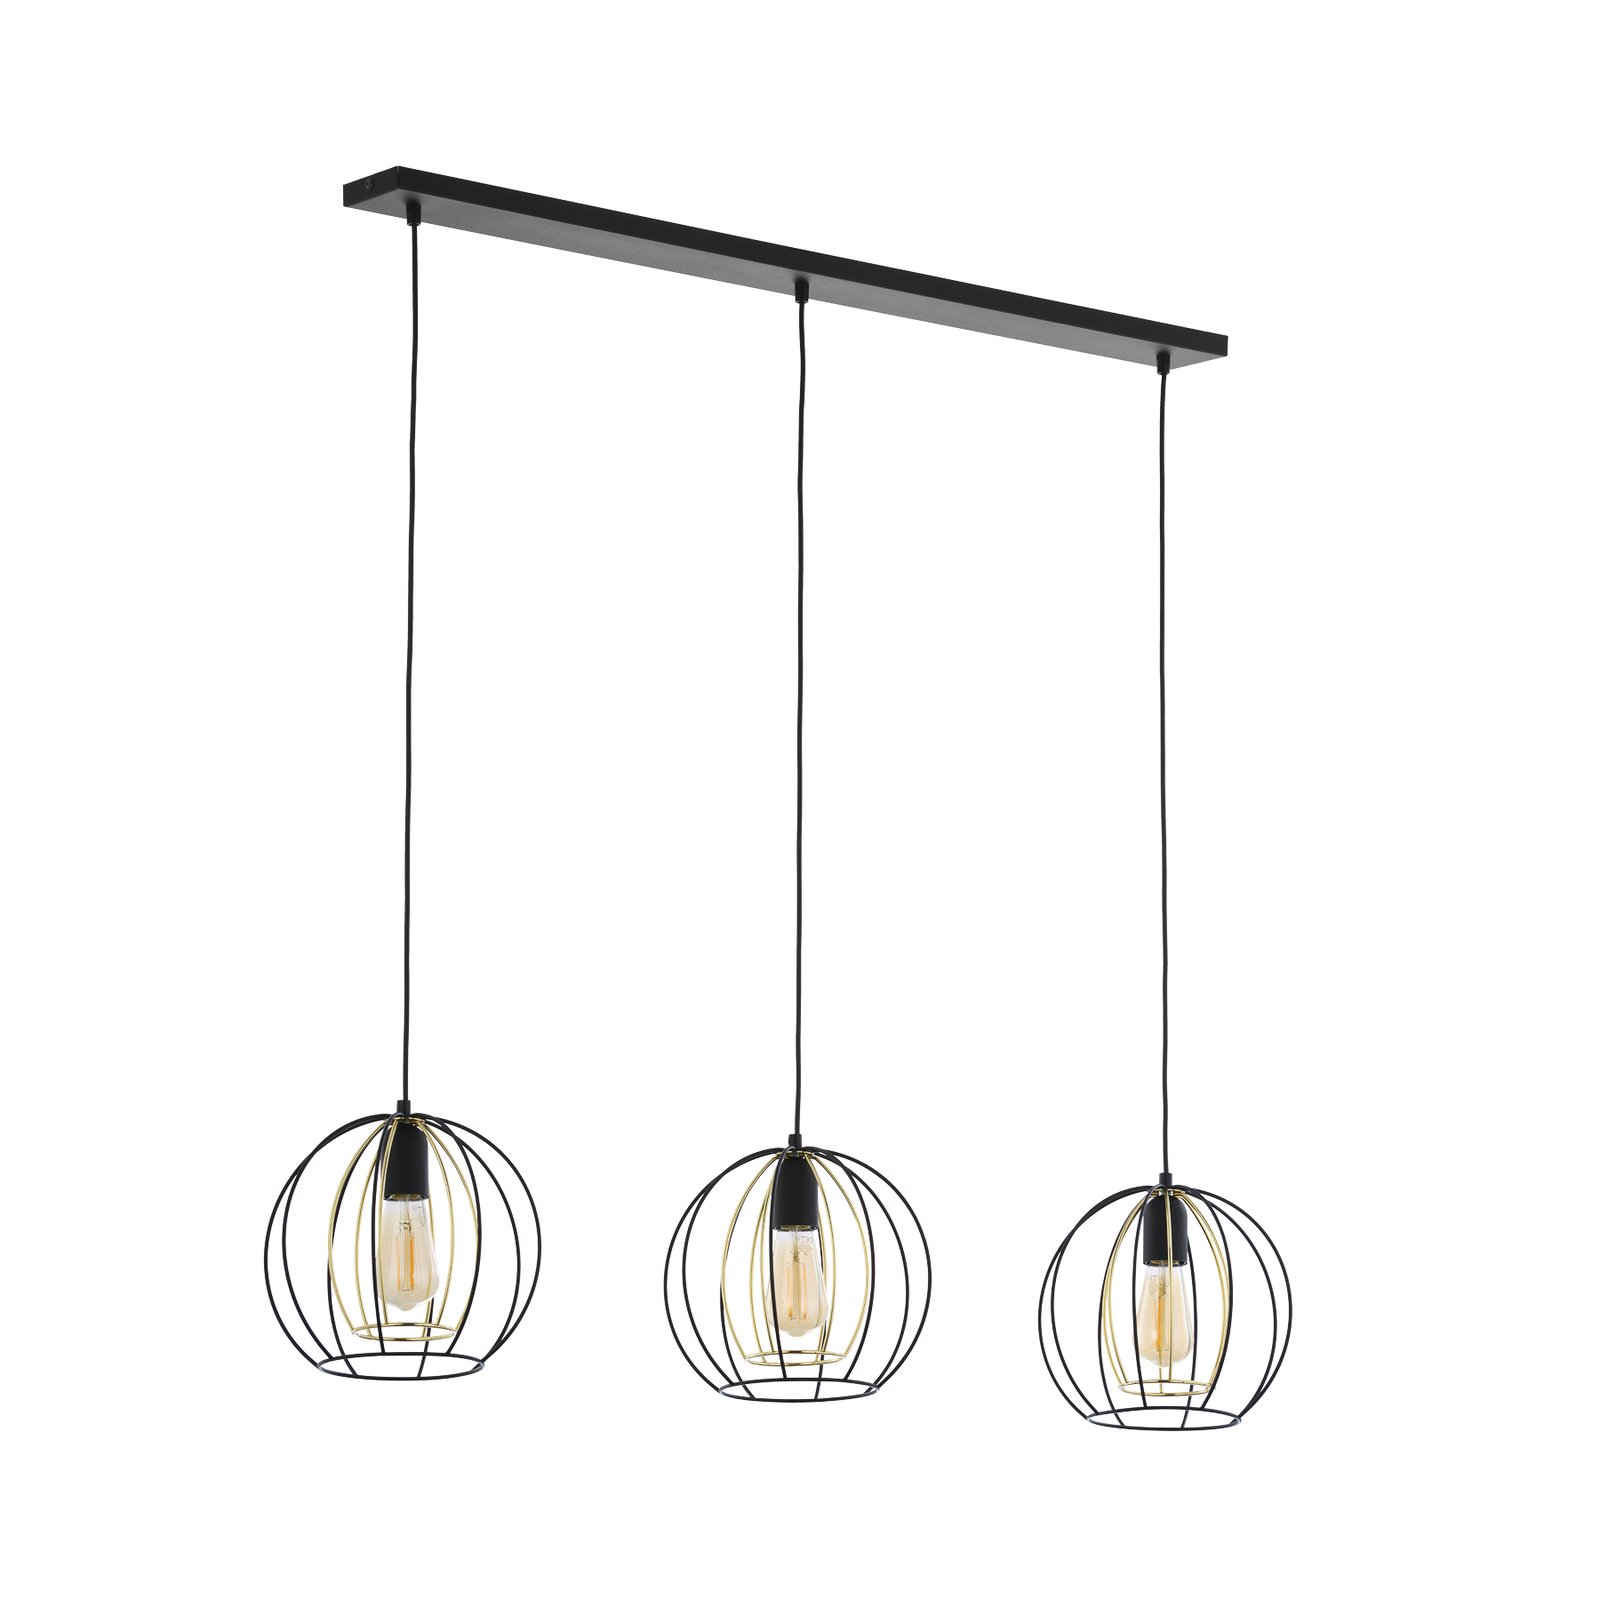 Jaula hanging light with cage lampshades, 3-bulb